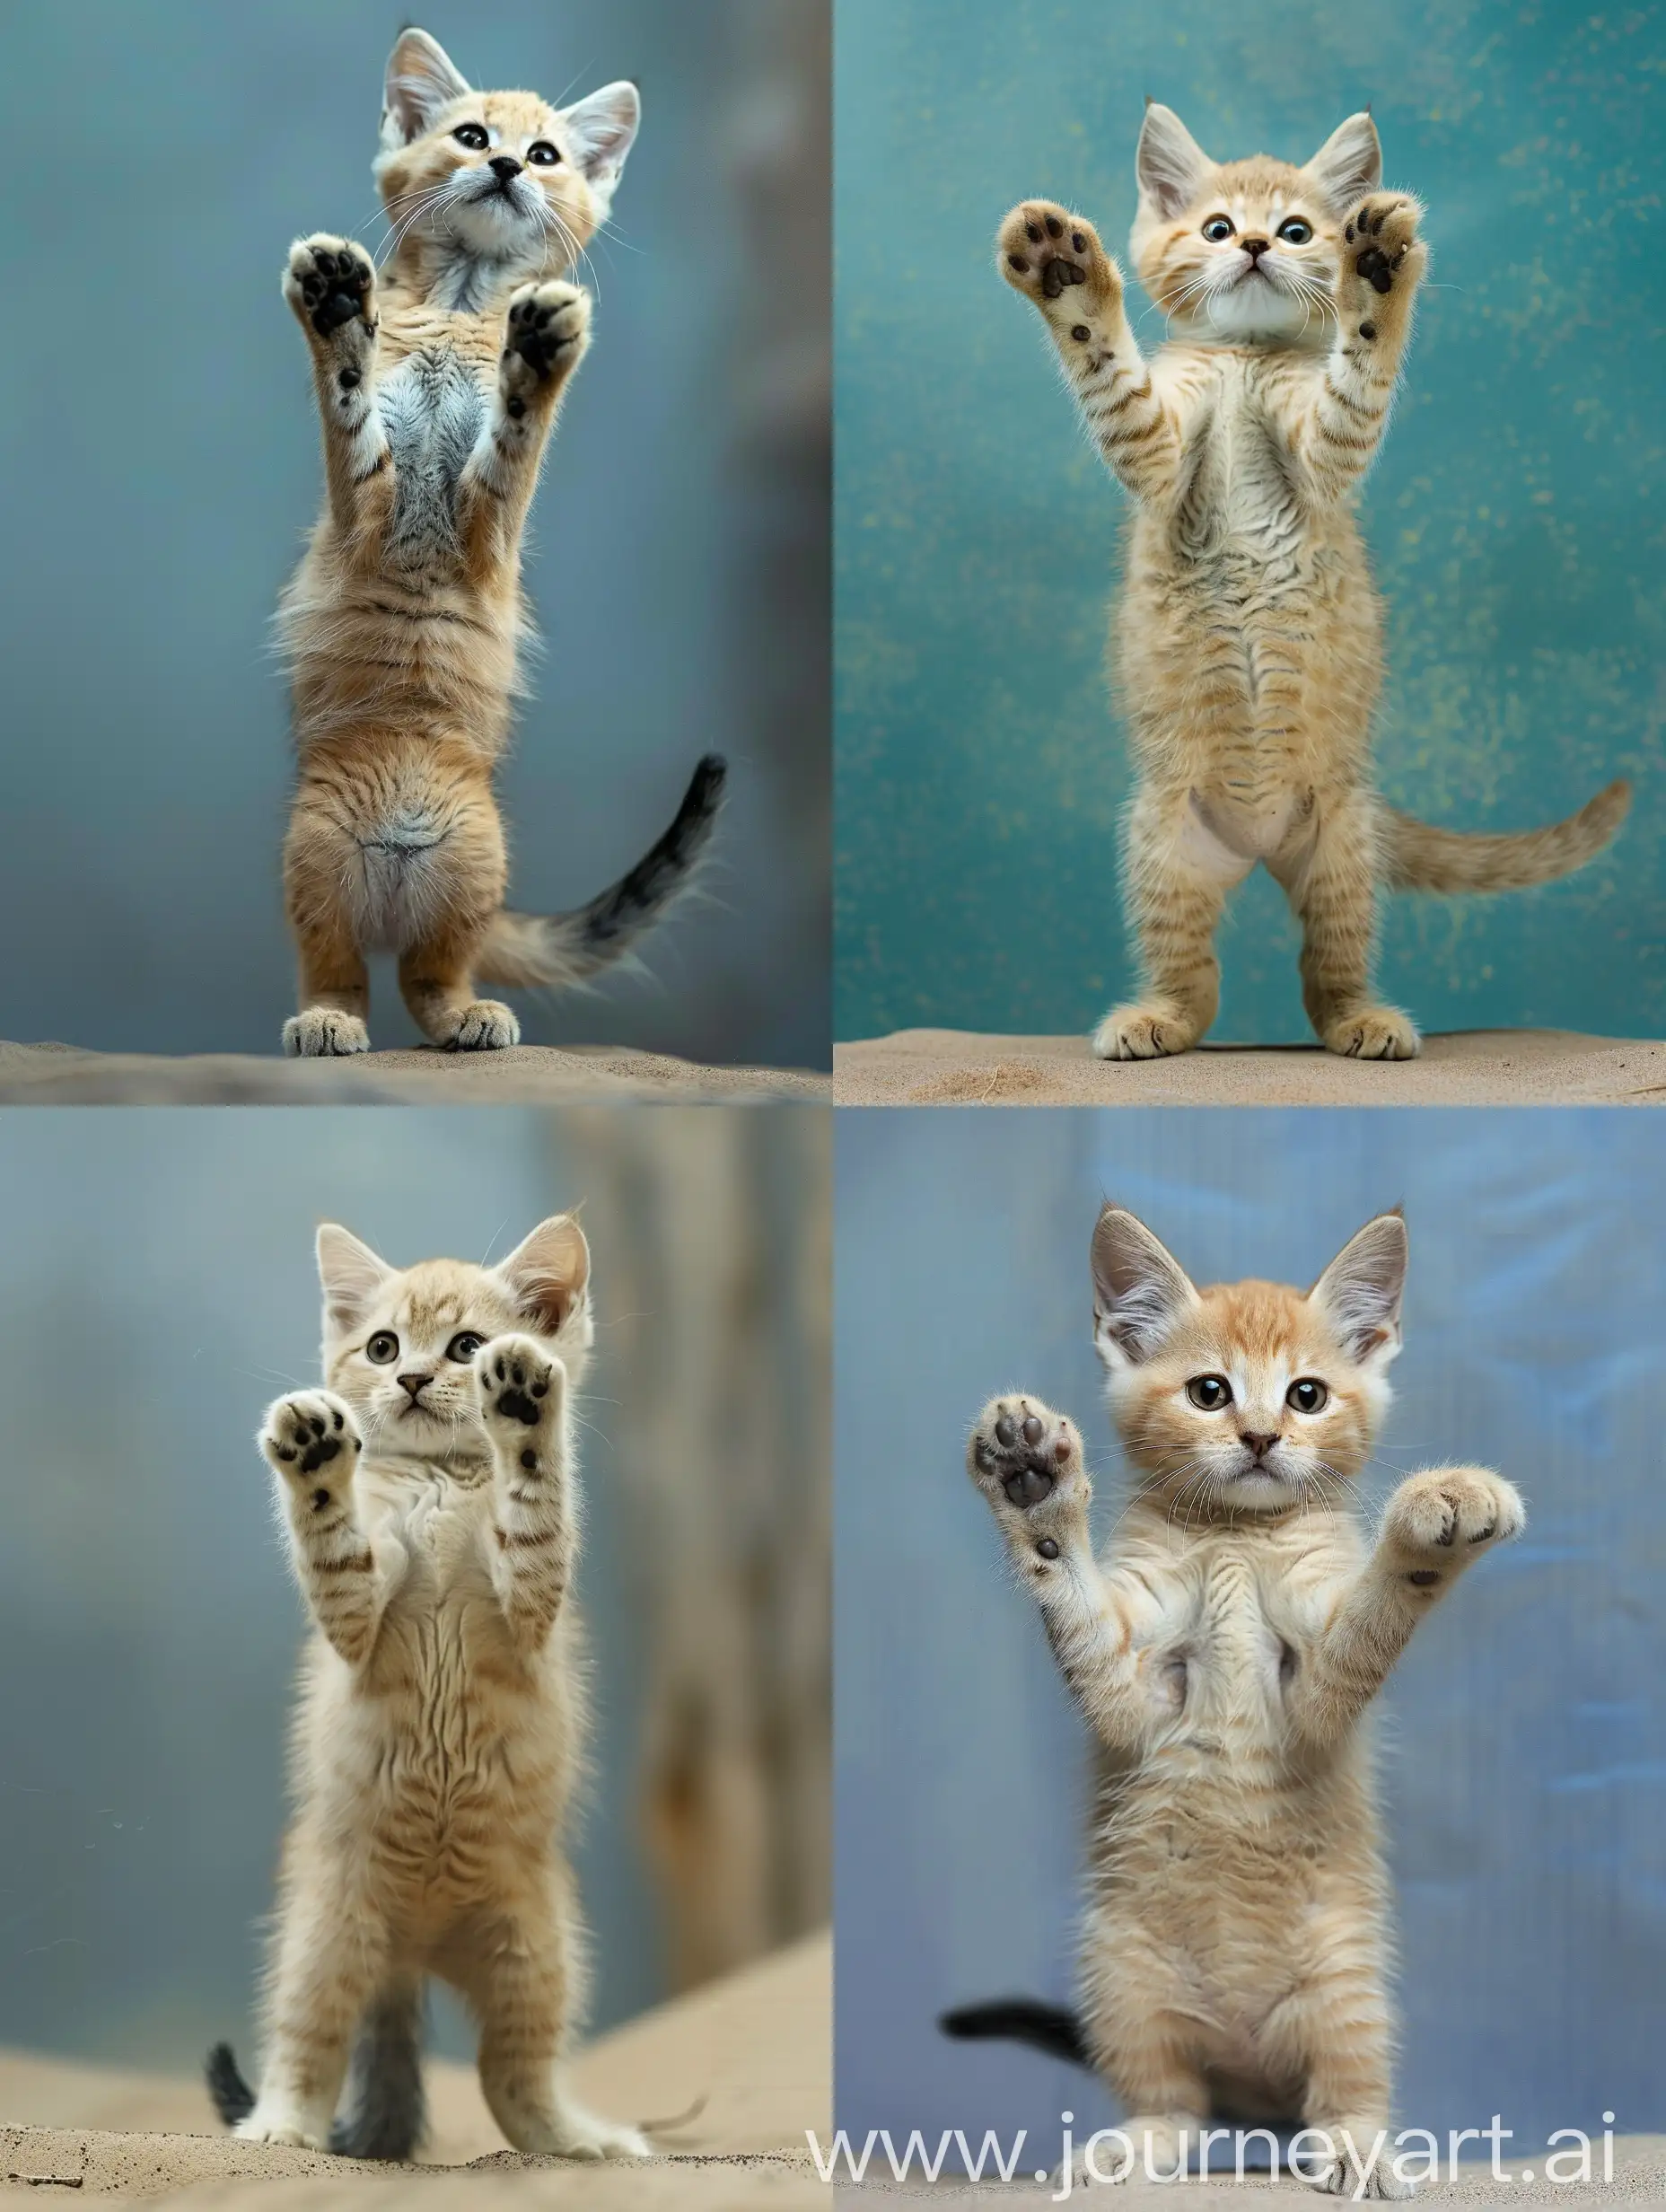 Adorable-Sand-Cat-Spreading-Front-Paws-in-Joyful-Gesture